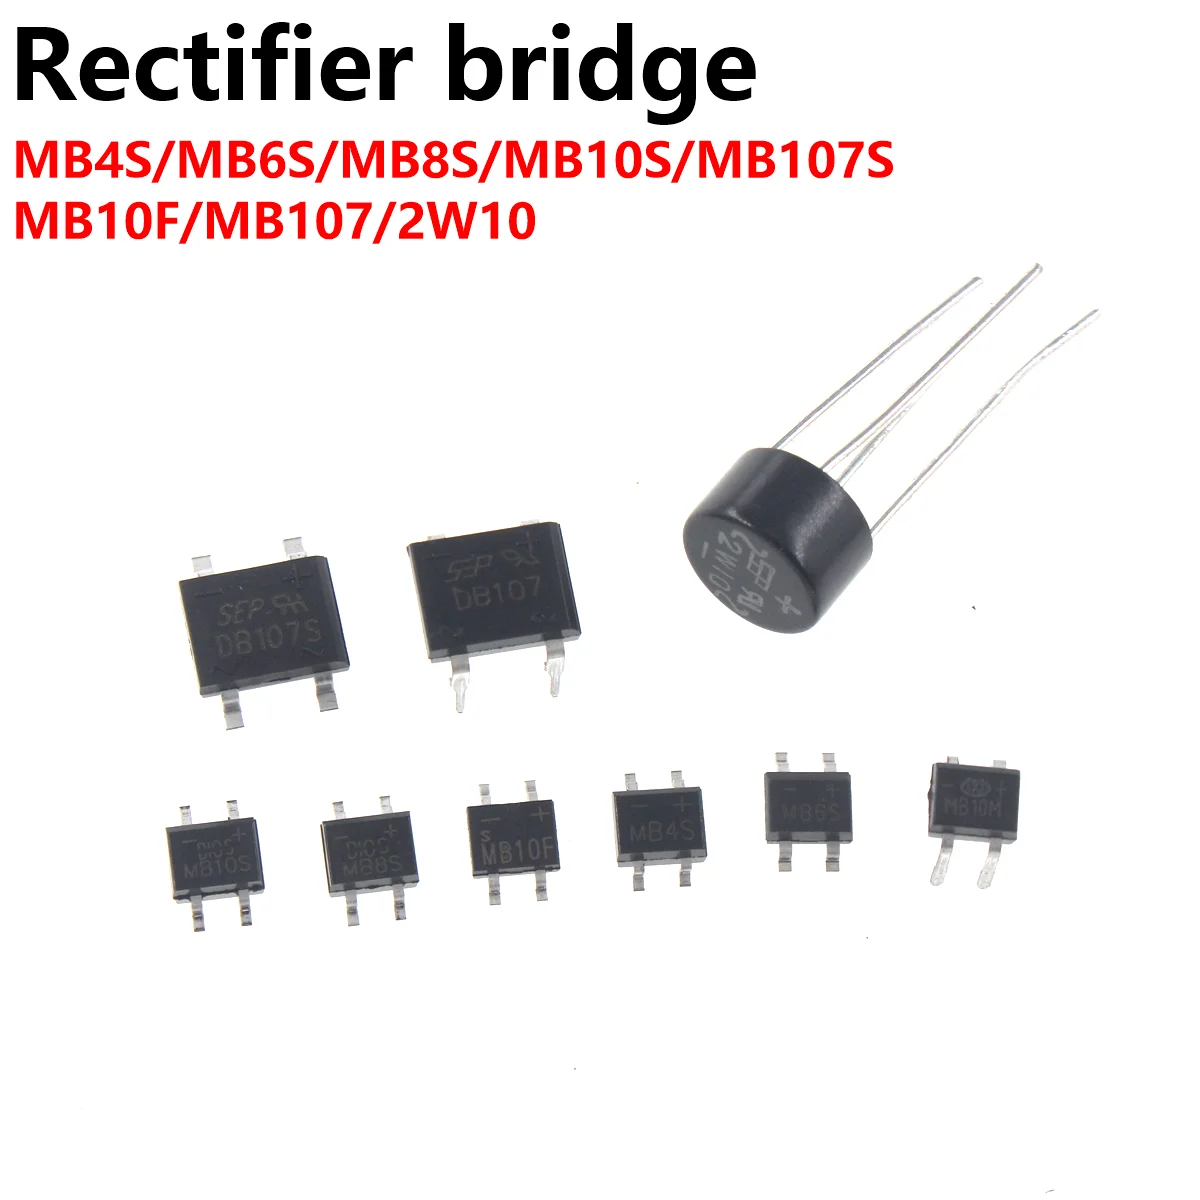 50pcs lot mb6m mb10m dip4 abs10 mb6s mb6f mb10s mb10f mb8s mb8f sop4 bridge rectifier 200/50PCS MB6S MB10S MB6F MB10F DB104S DB105S DB107S MB10M DB107 DB157S DB207 ABS6 ABS8 ABS10 ABS210 2W10